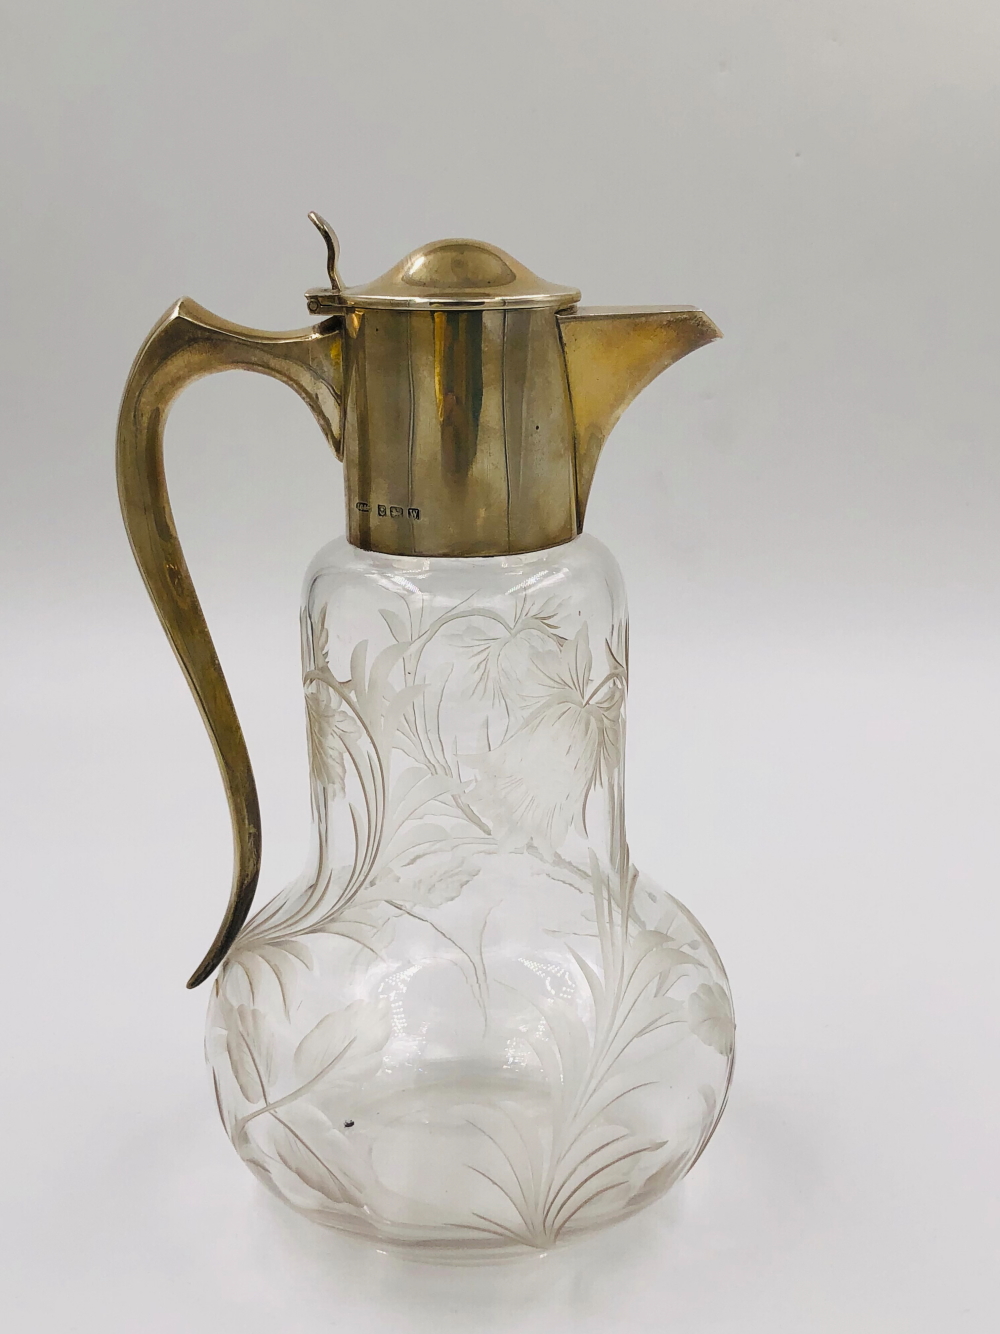 A HALLMARKED SILVER AND ETCHED GLASS CLARET JUG DATED 1921 BIRMINGHAM FOR JOHN GRINSELL AND SONS.